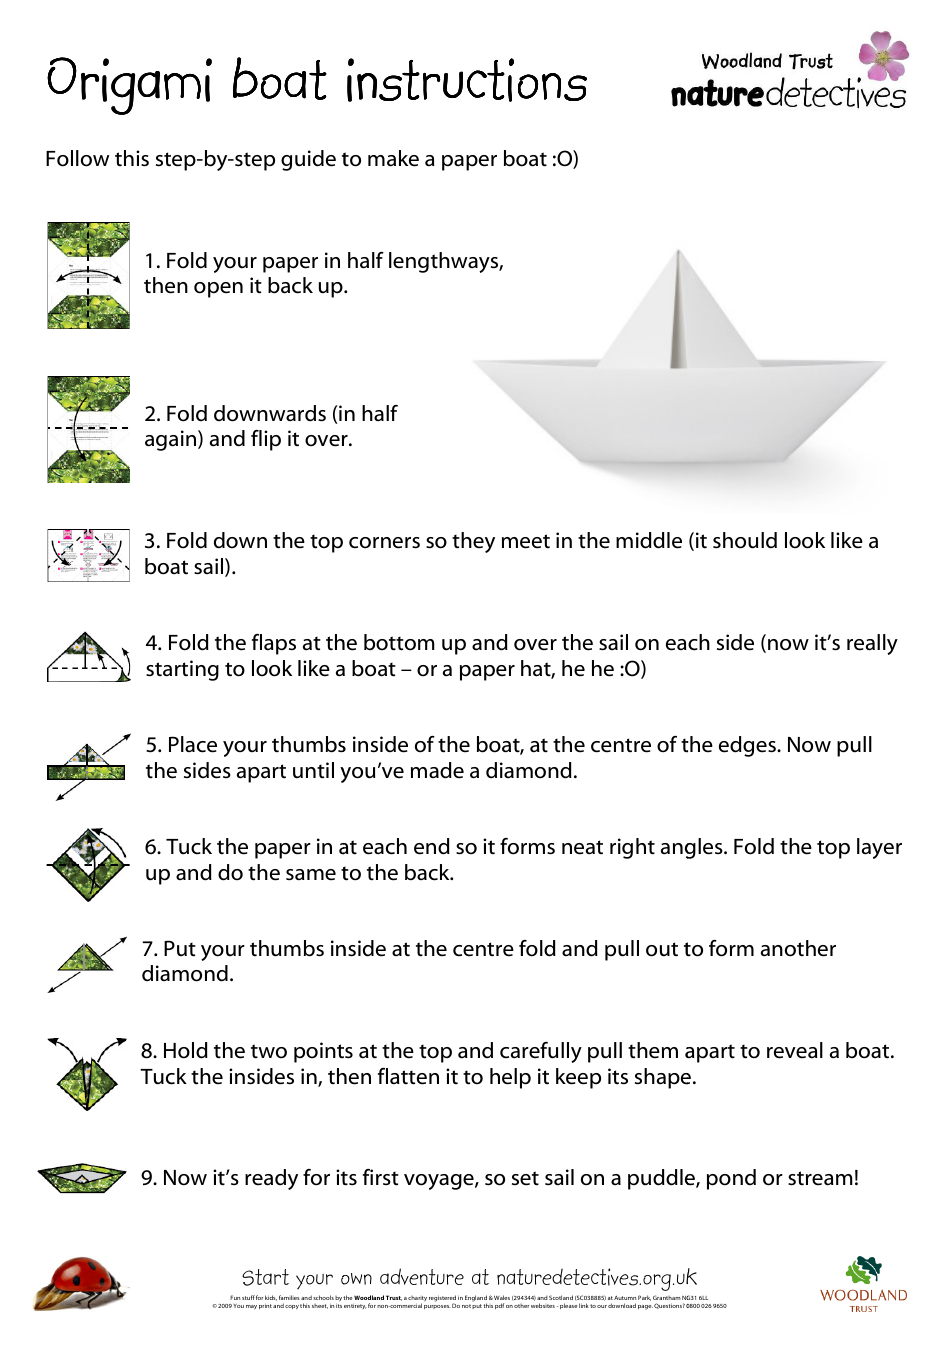 origami boat instructions with Woodland Trust branding